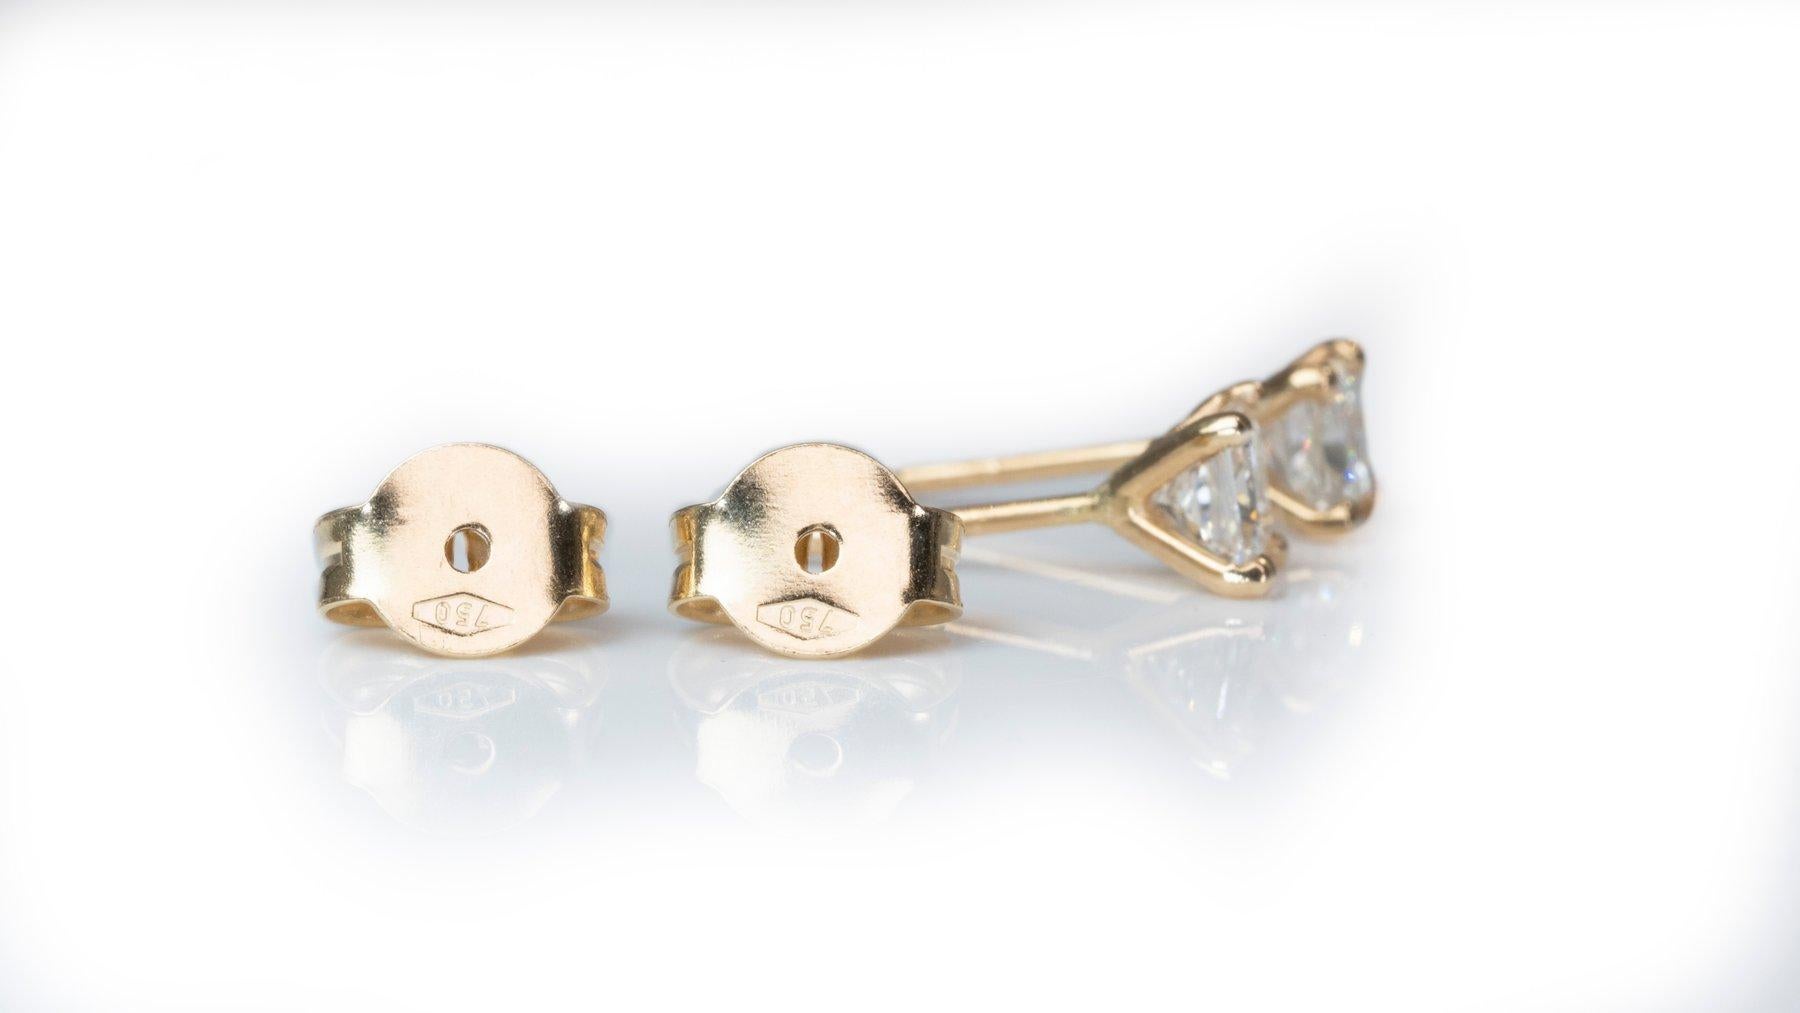 Elegant 1.86ct Diamond Stud Earrings in 18k Yellow Gold - GIA Certified  In New Condition For Sale In רמת גן, IL